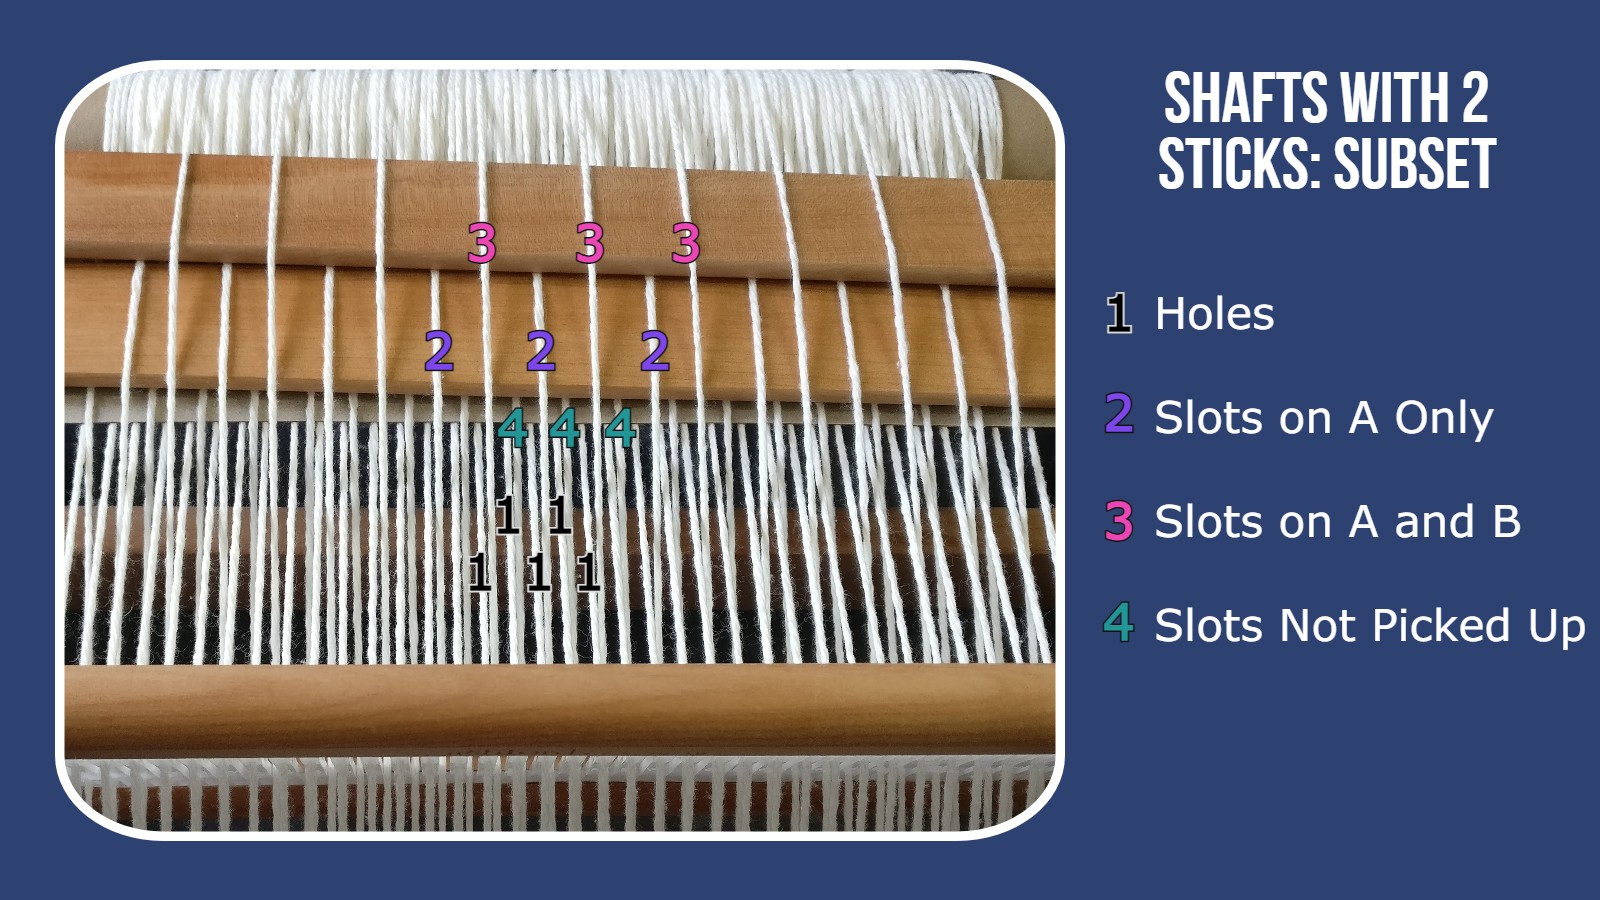 2 stick pick up to shaft illustration: one stick pickes up a subset of the other